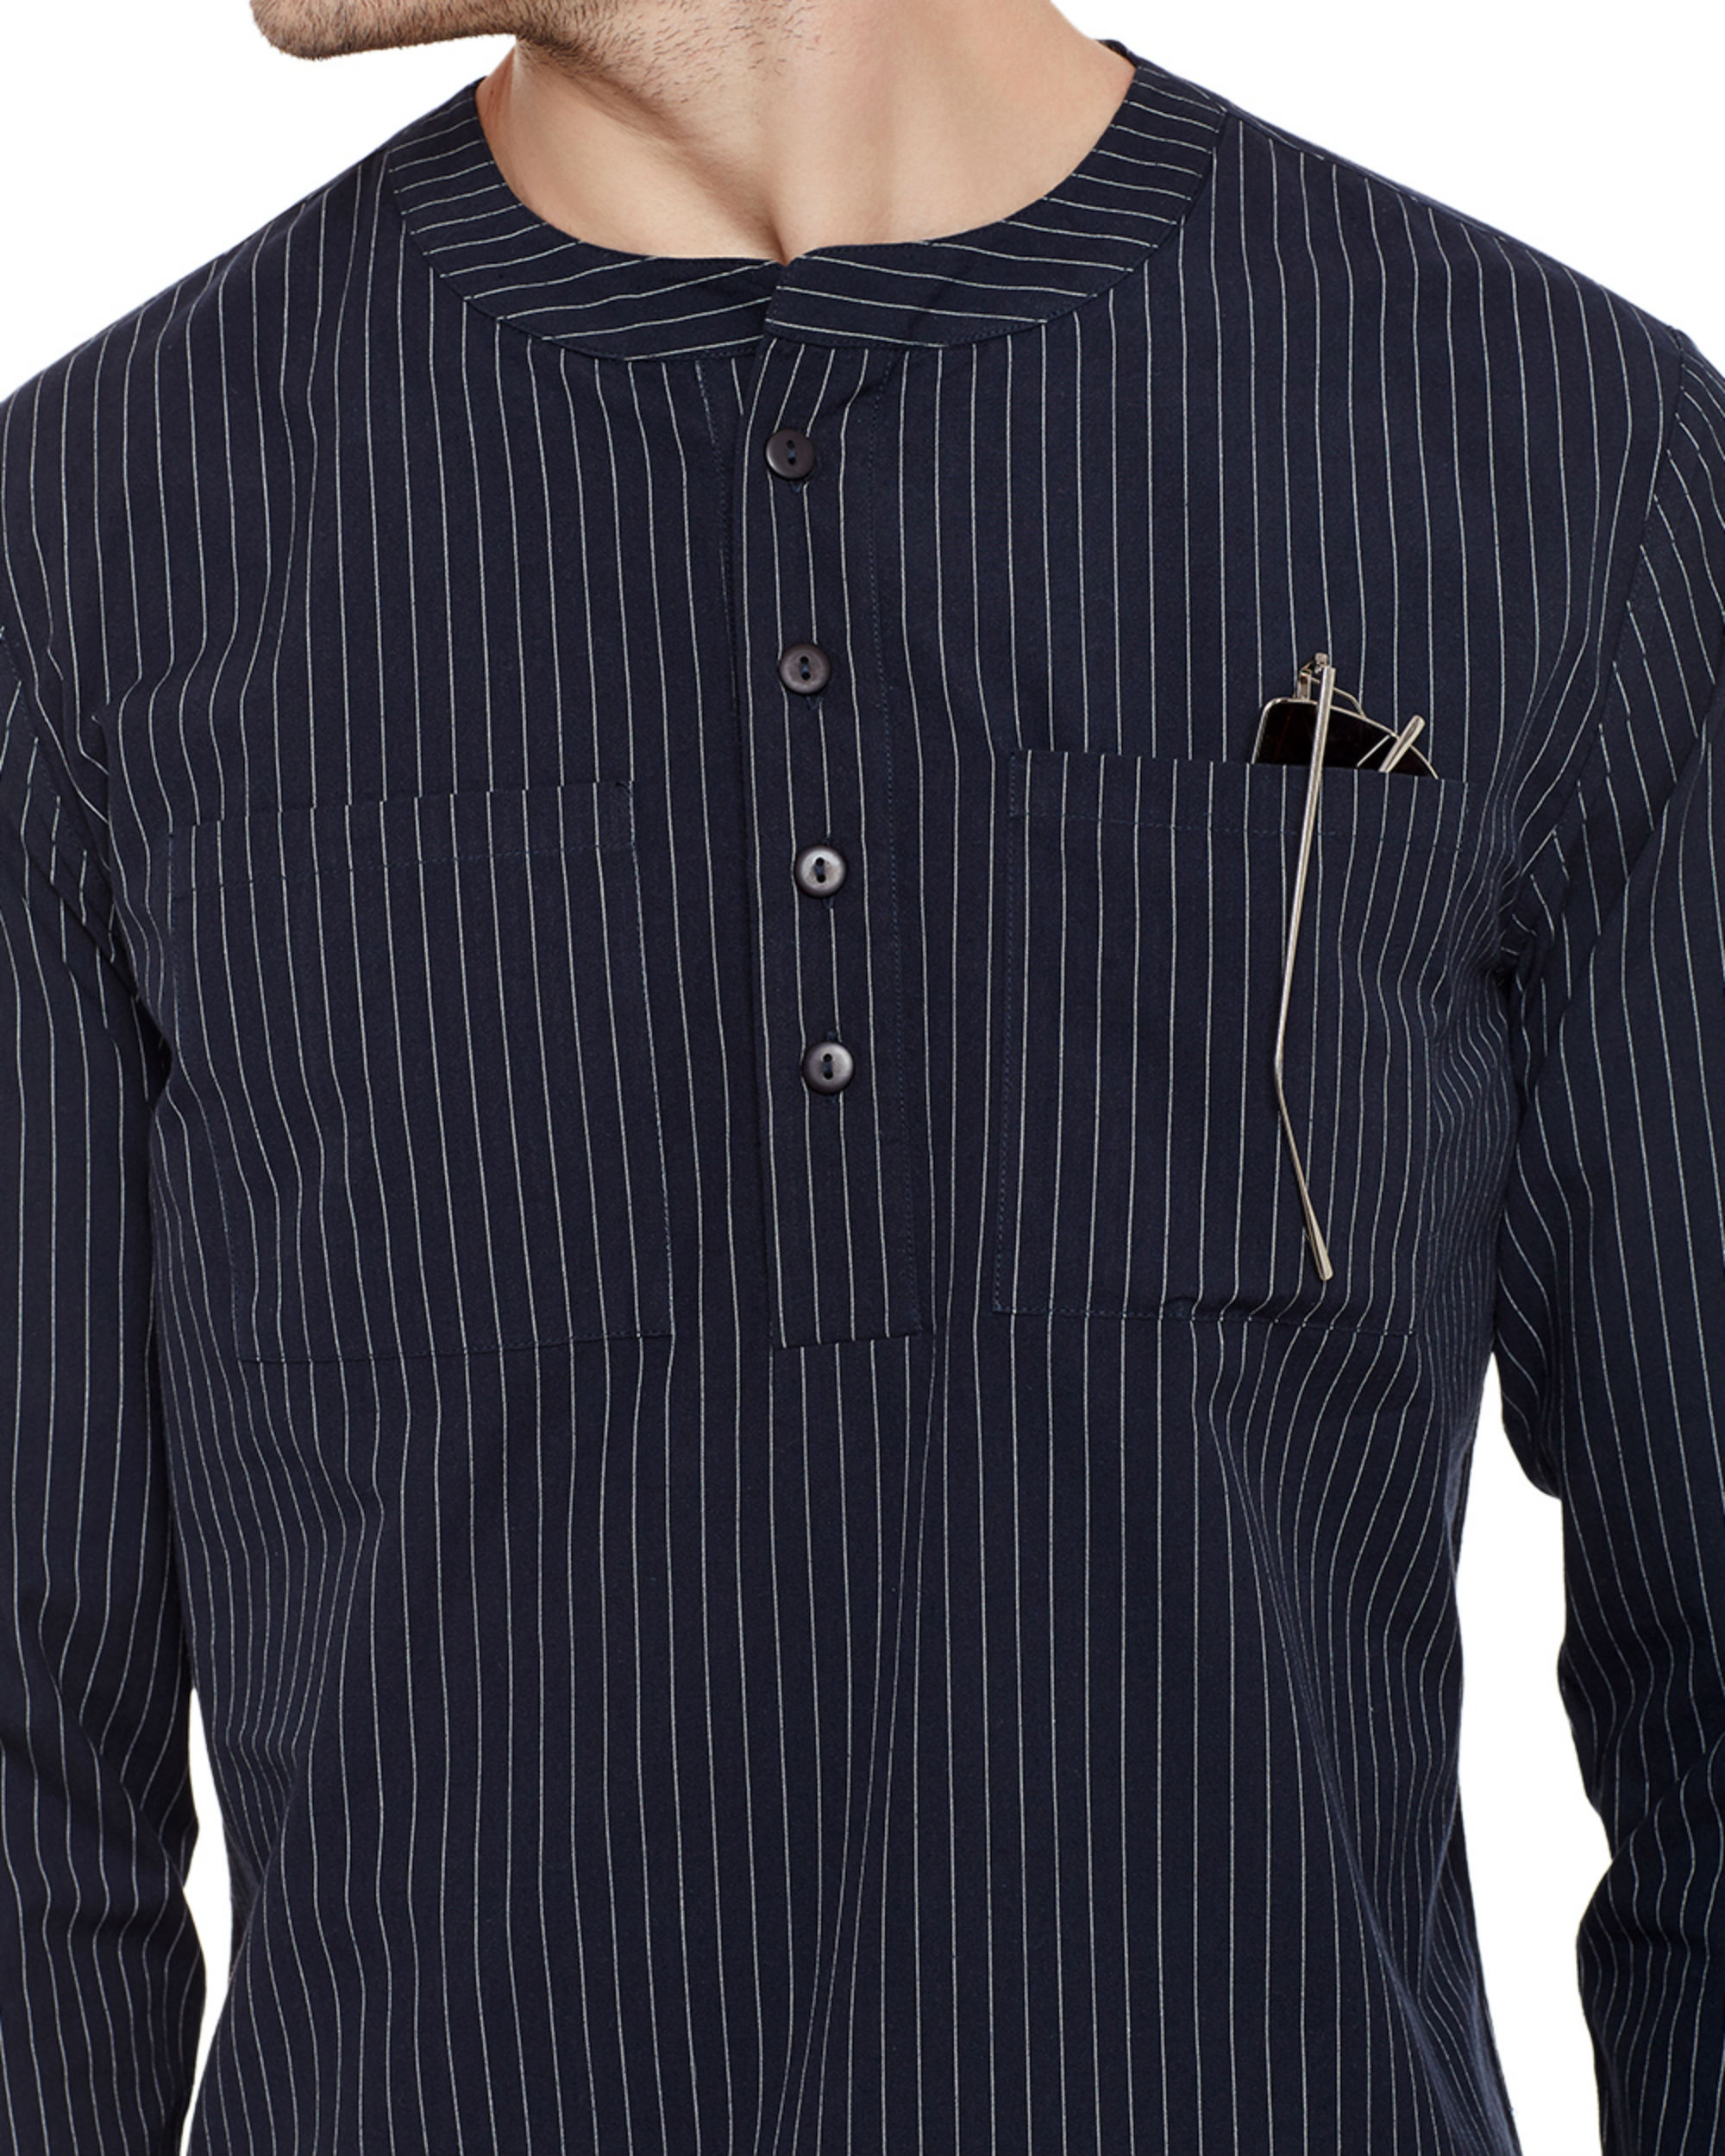 Pin stripe henley shirt by Firm Clothing | The Secret Label